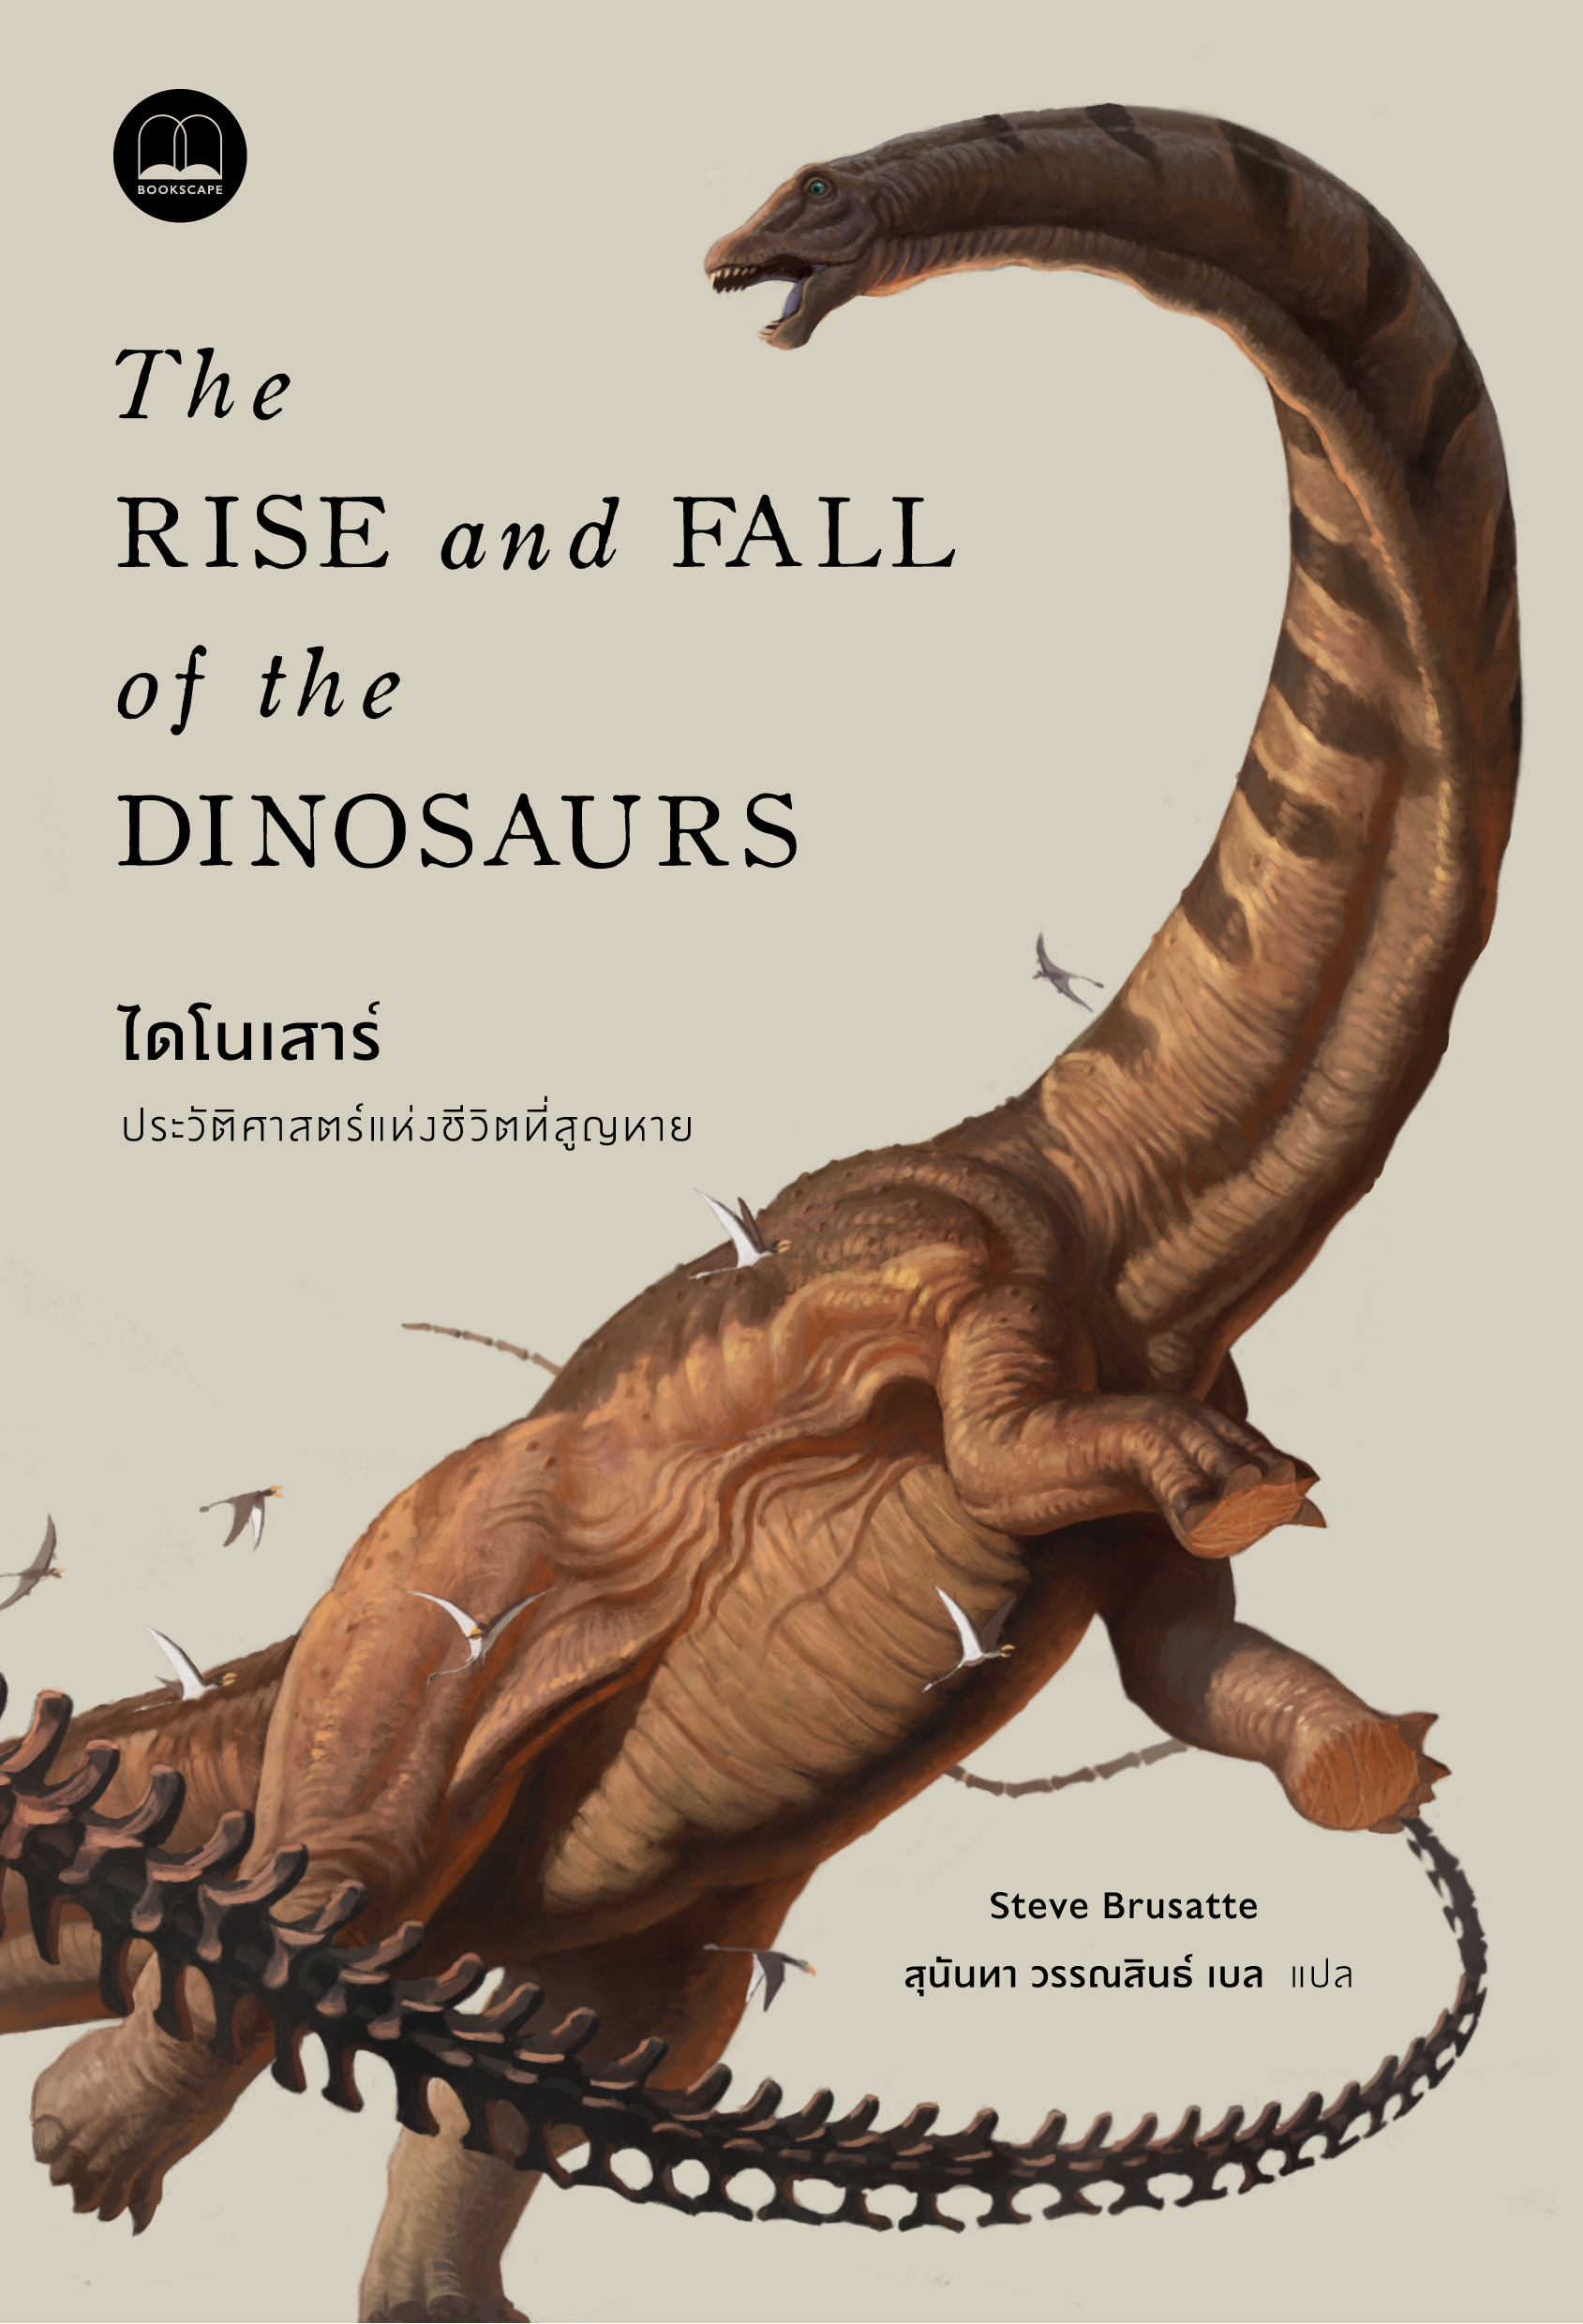 the rise and fall of the dinosaurs a new history of a lost world by: steve brusatte